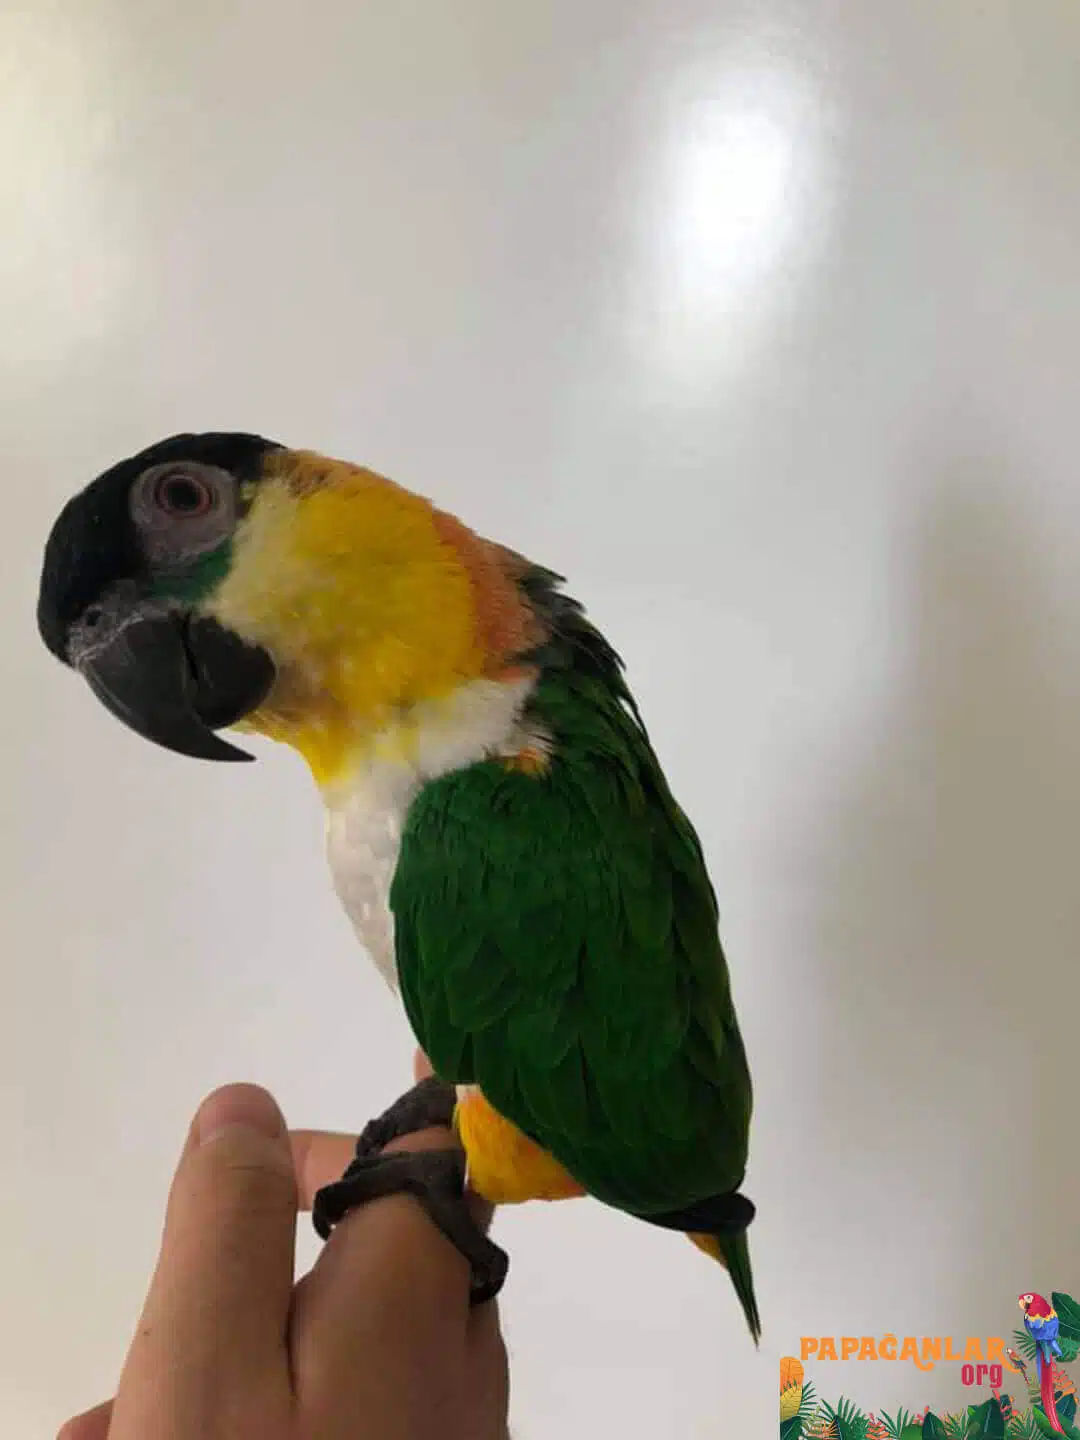 where can i find caique parrot